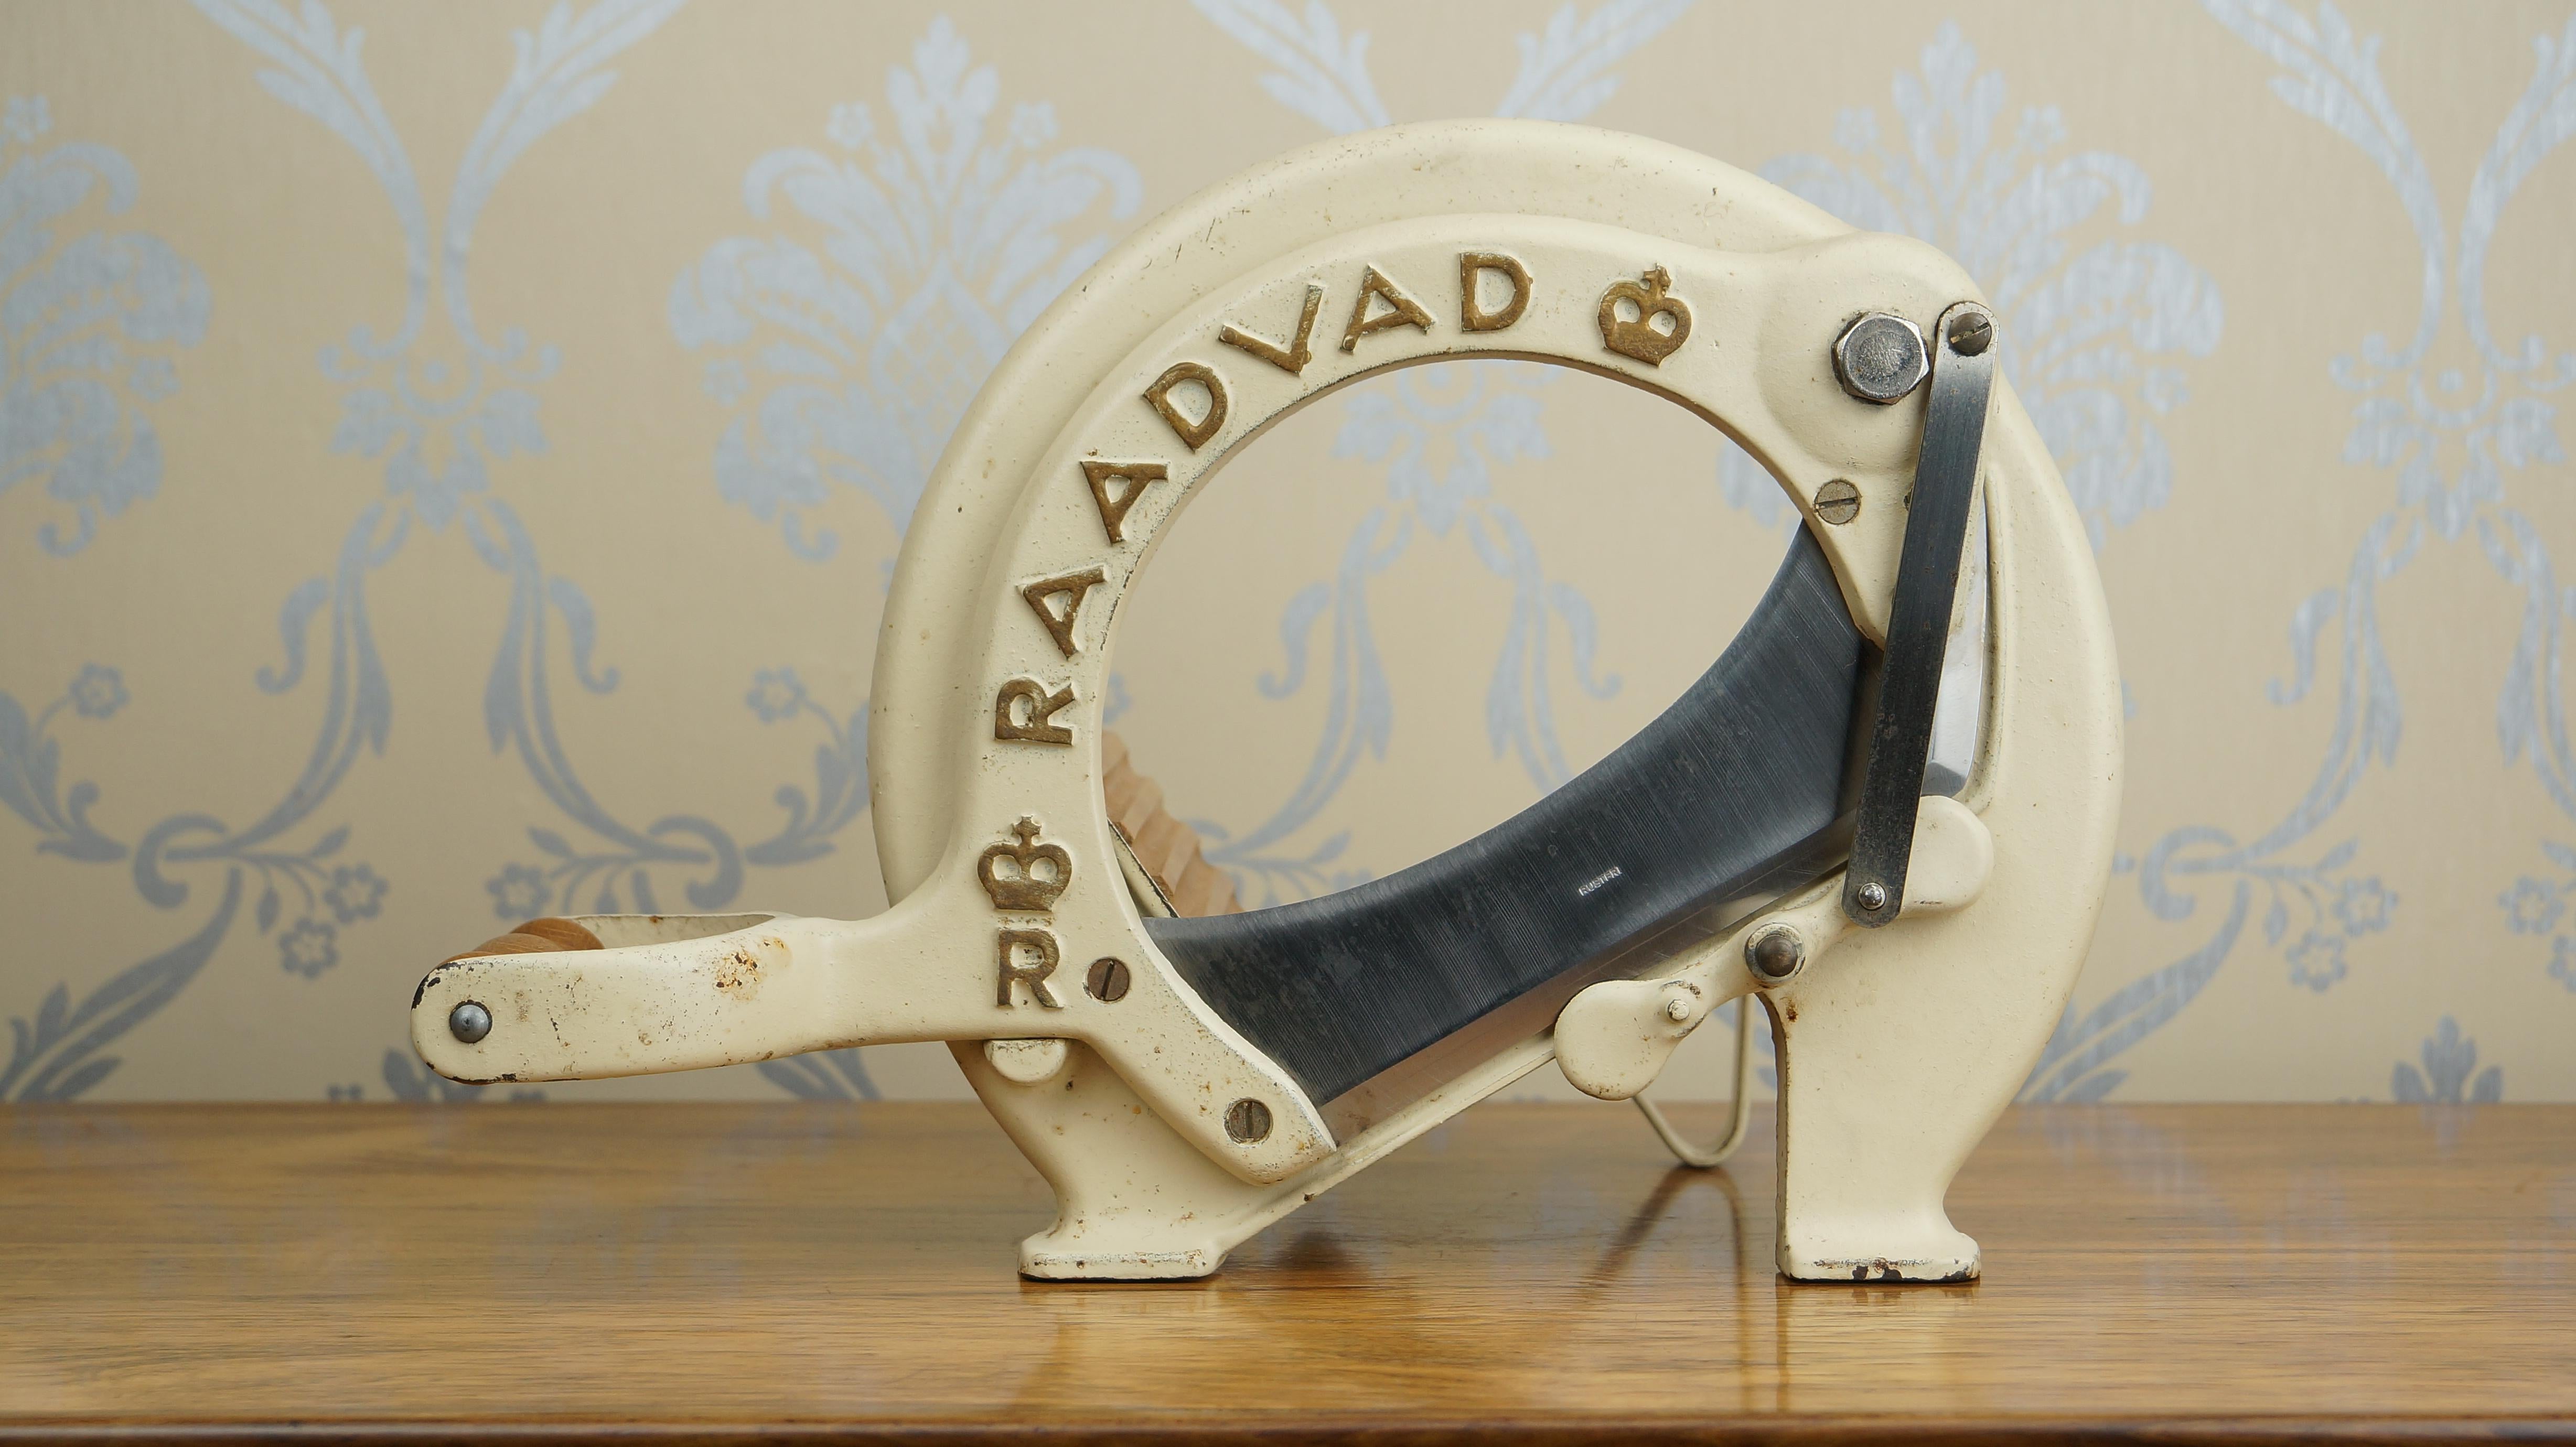 Vintage Danish cast iron bread slicer in cream, steel blade, oak handle and birch boards, designed by Ove Larsen in 1956 for Raadvad Knivfabrik , Denmark. 

The guillotine-style bread slicer was a staple of the Danish home from the 19th century,